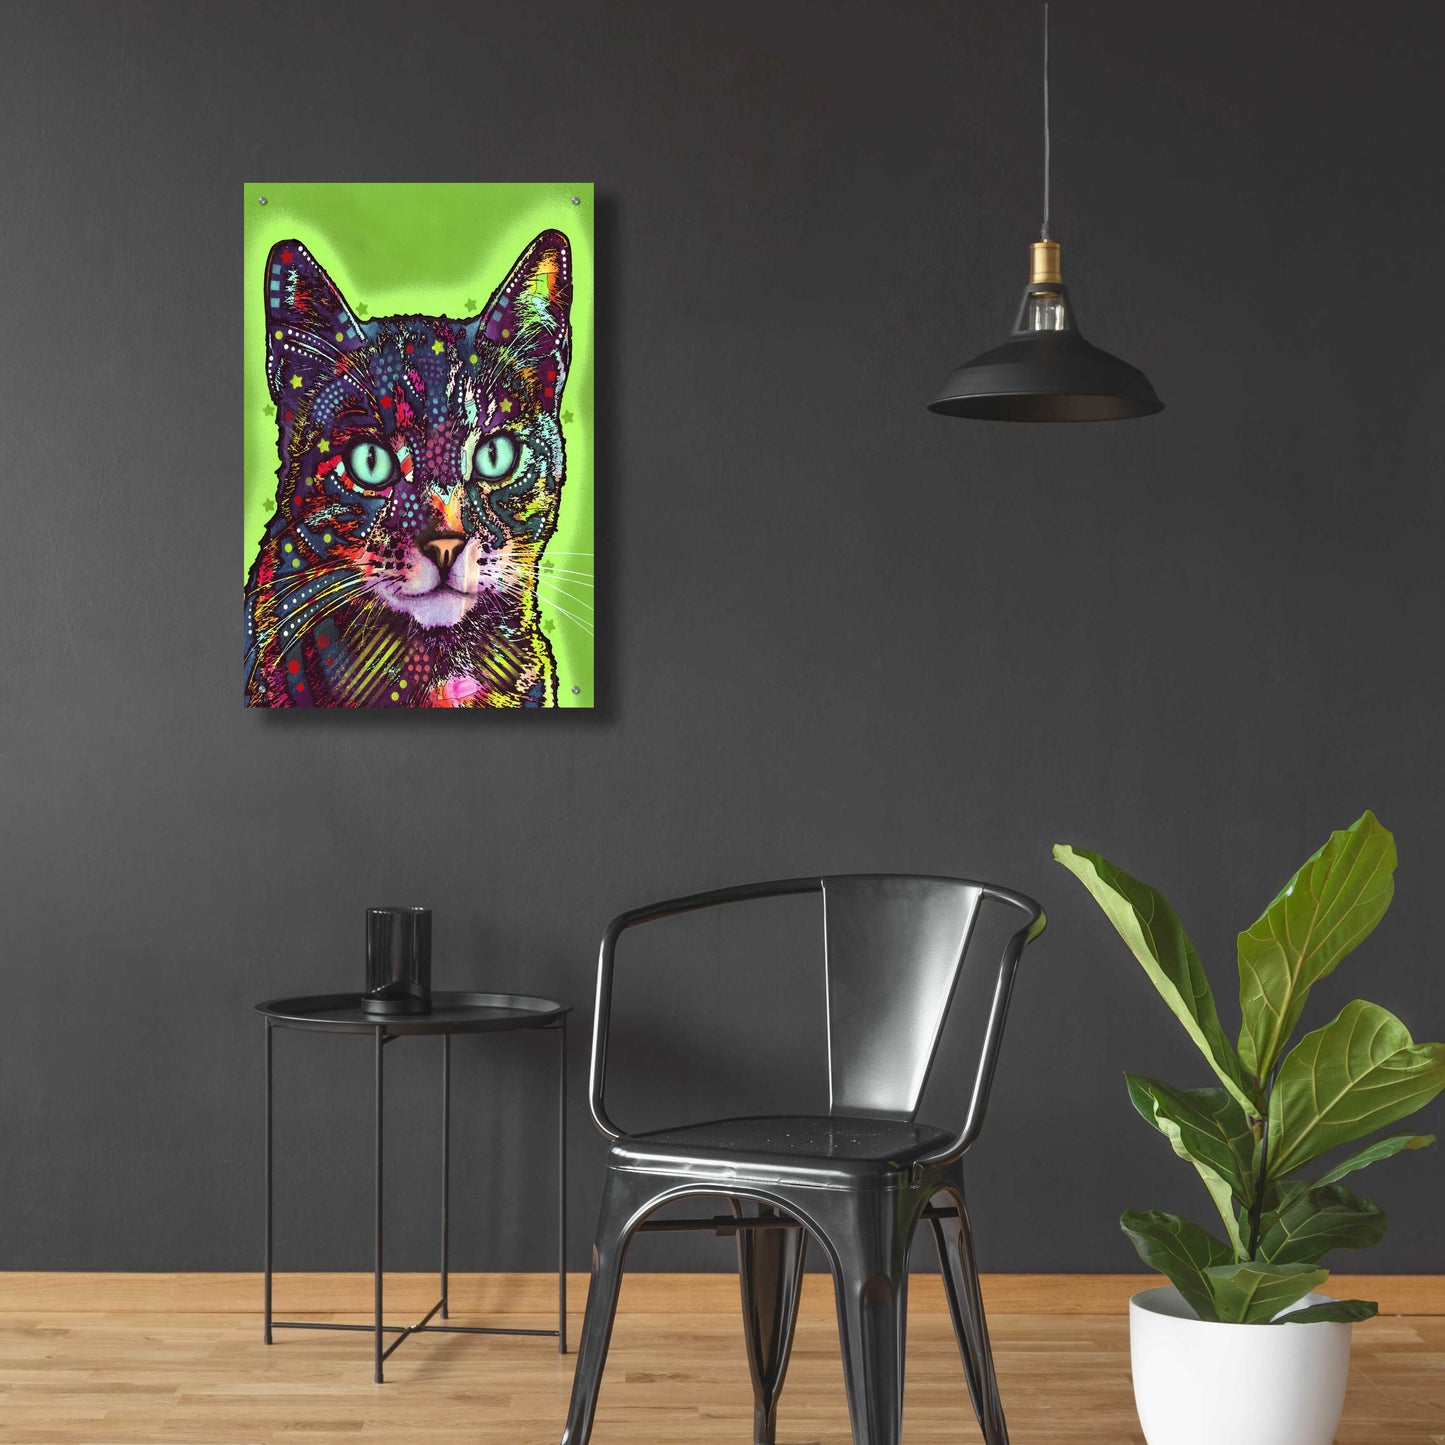 Epic Art 'Watchful Cat' by Dean Russo, Acrylic Glass Wall Art,24x36